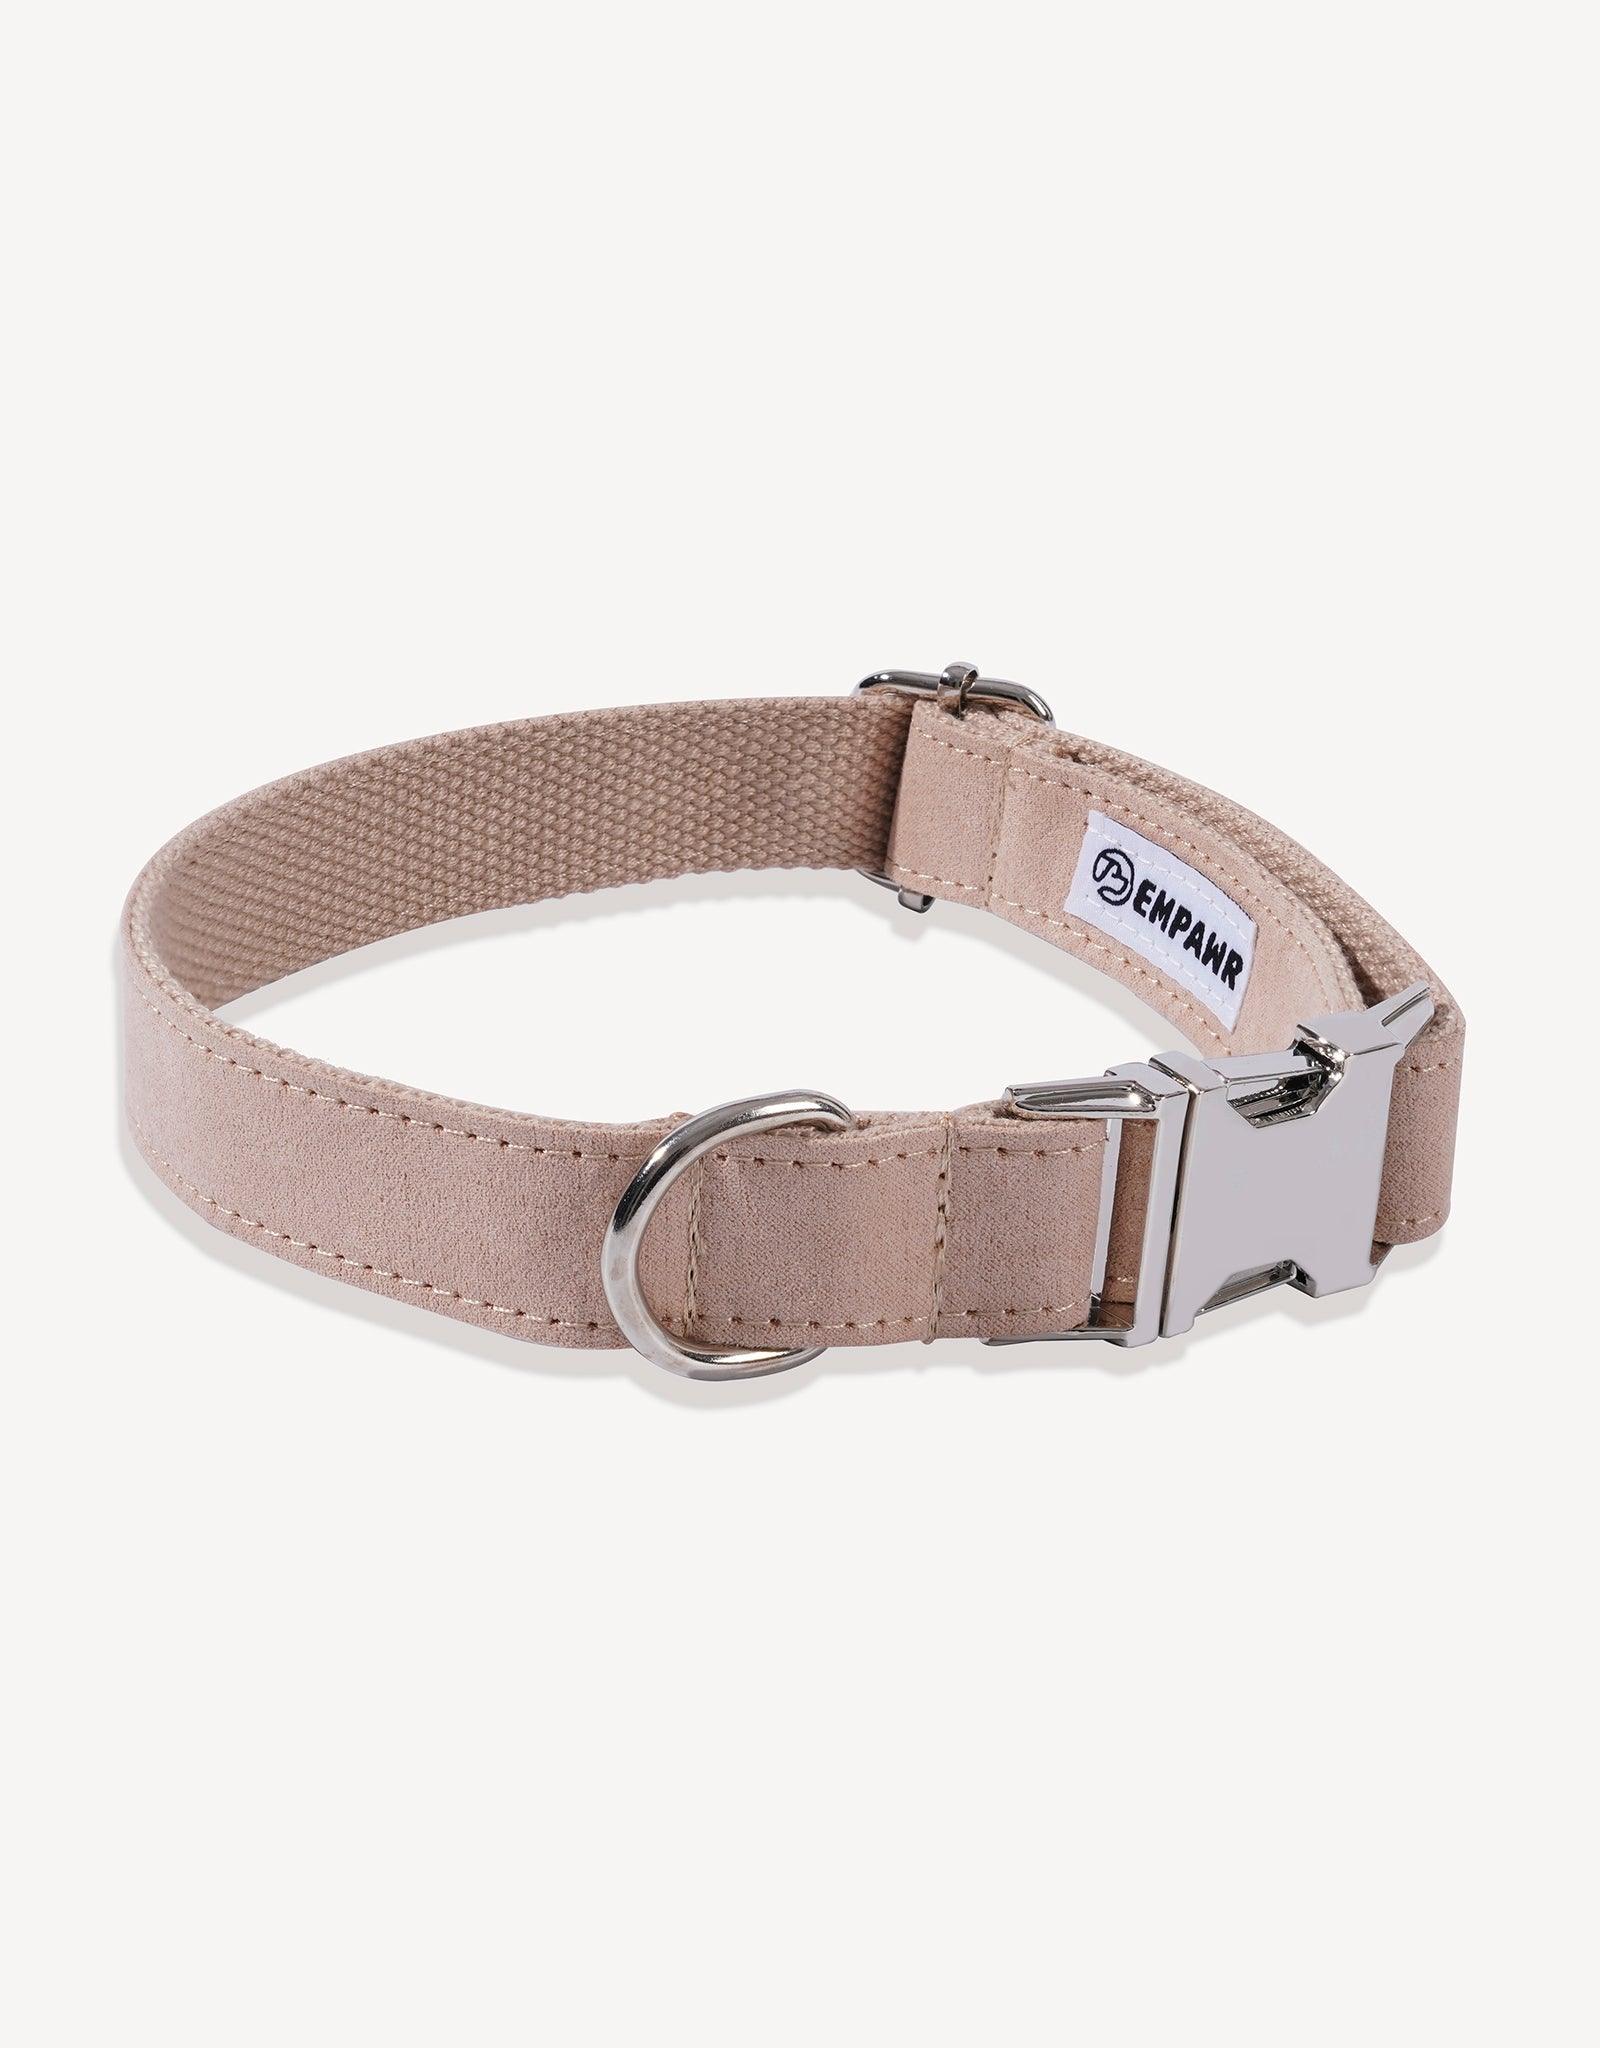 Pearl White Royal Luxe Dog Collar - Empawr